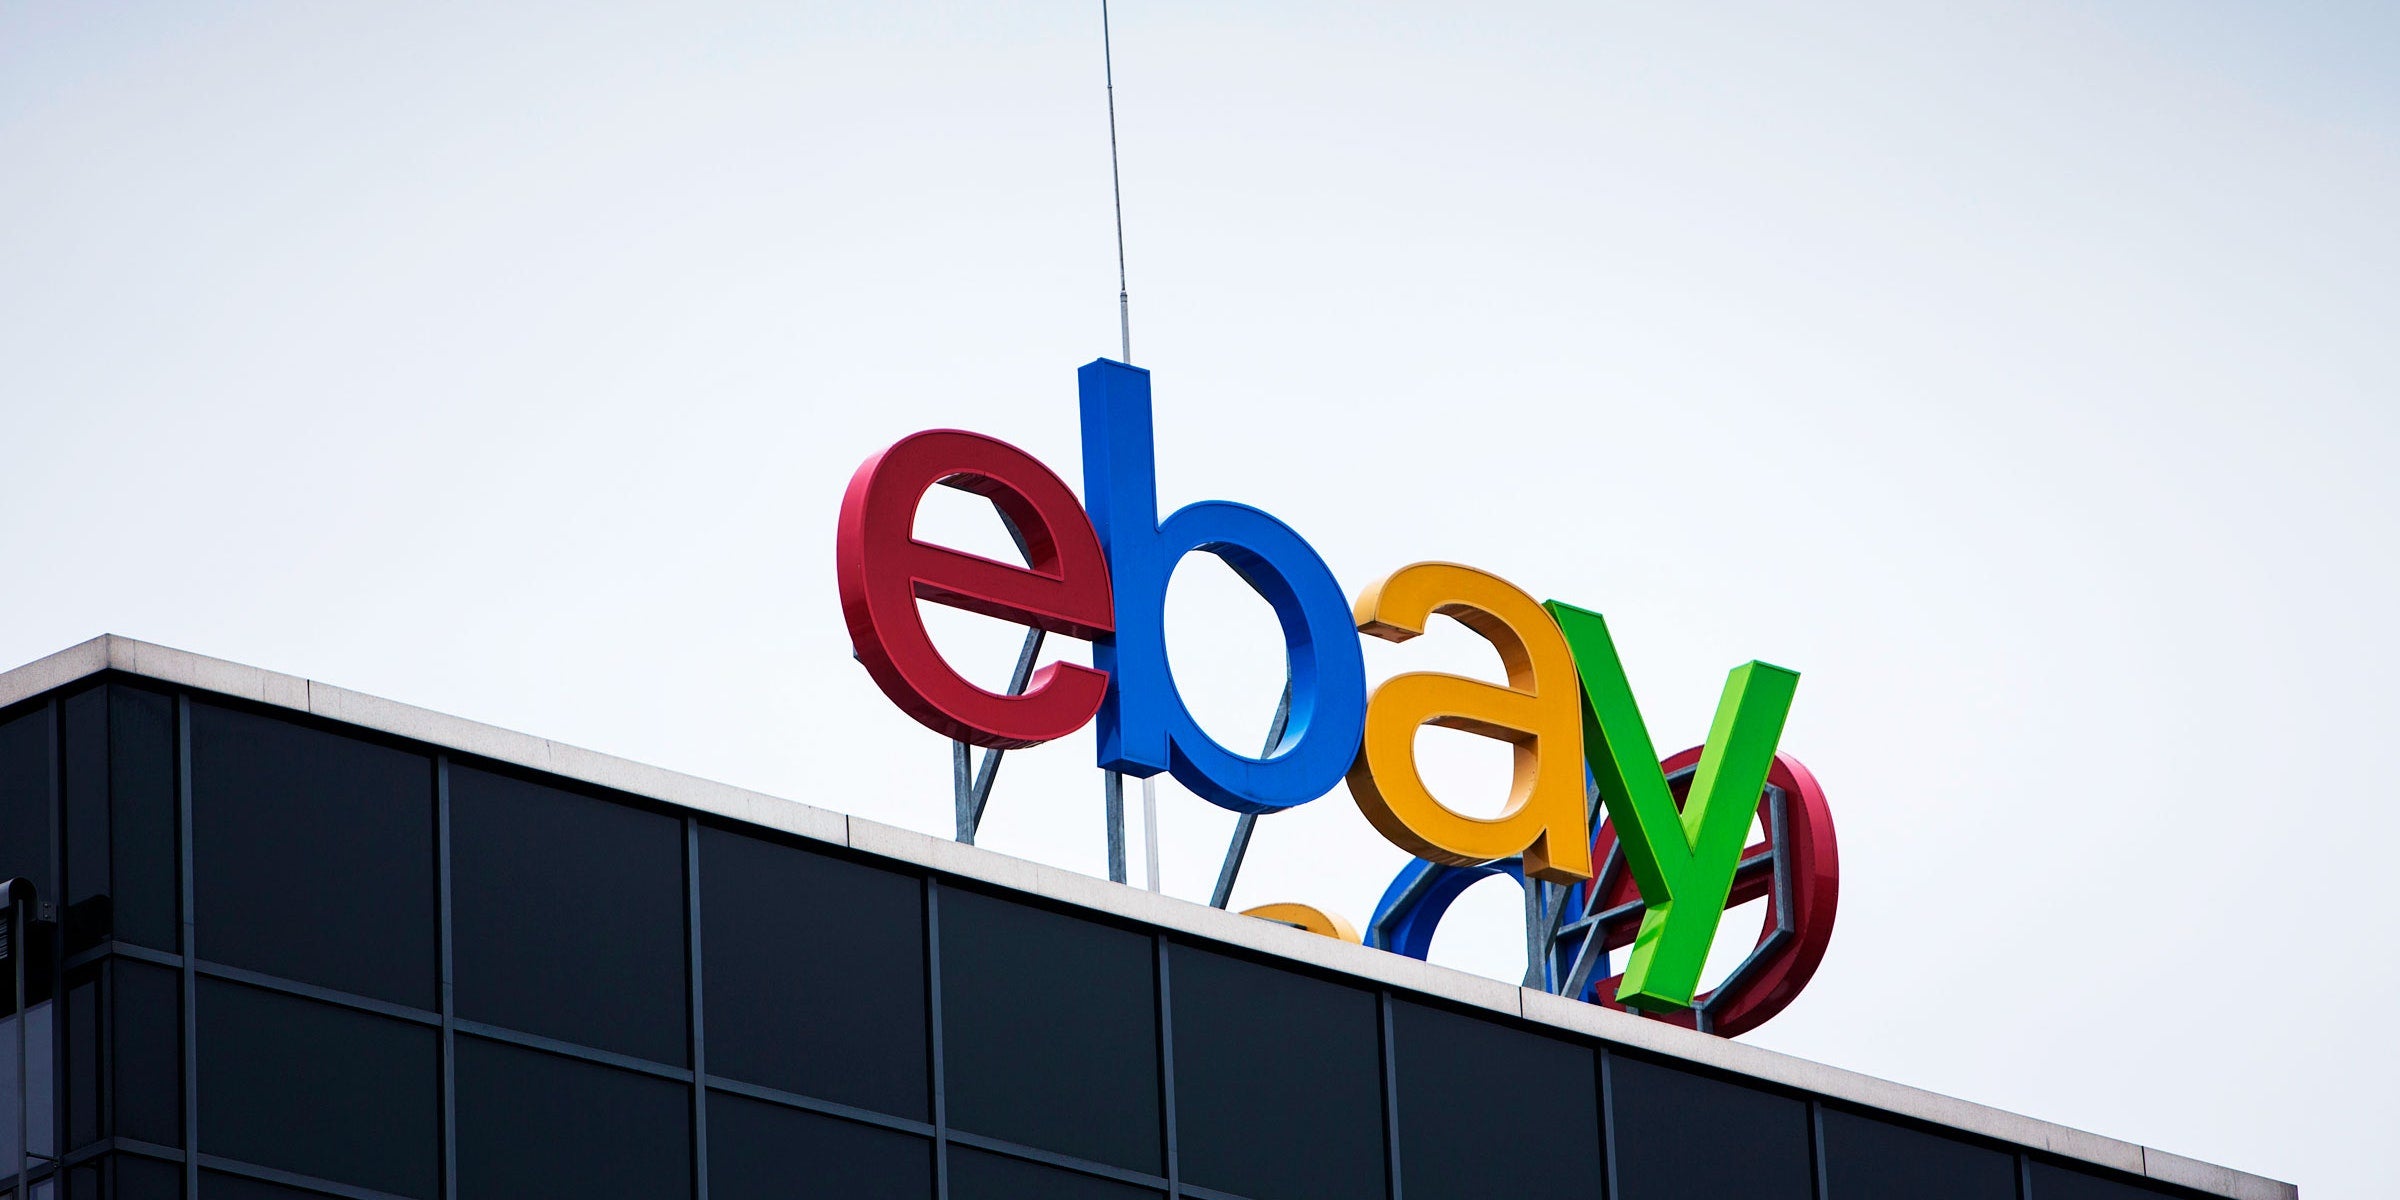 eBay to sell Gumtree UK and Motors.co.uk following CMA orders